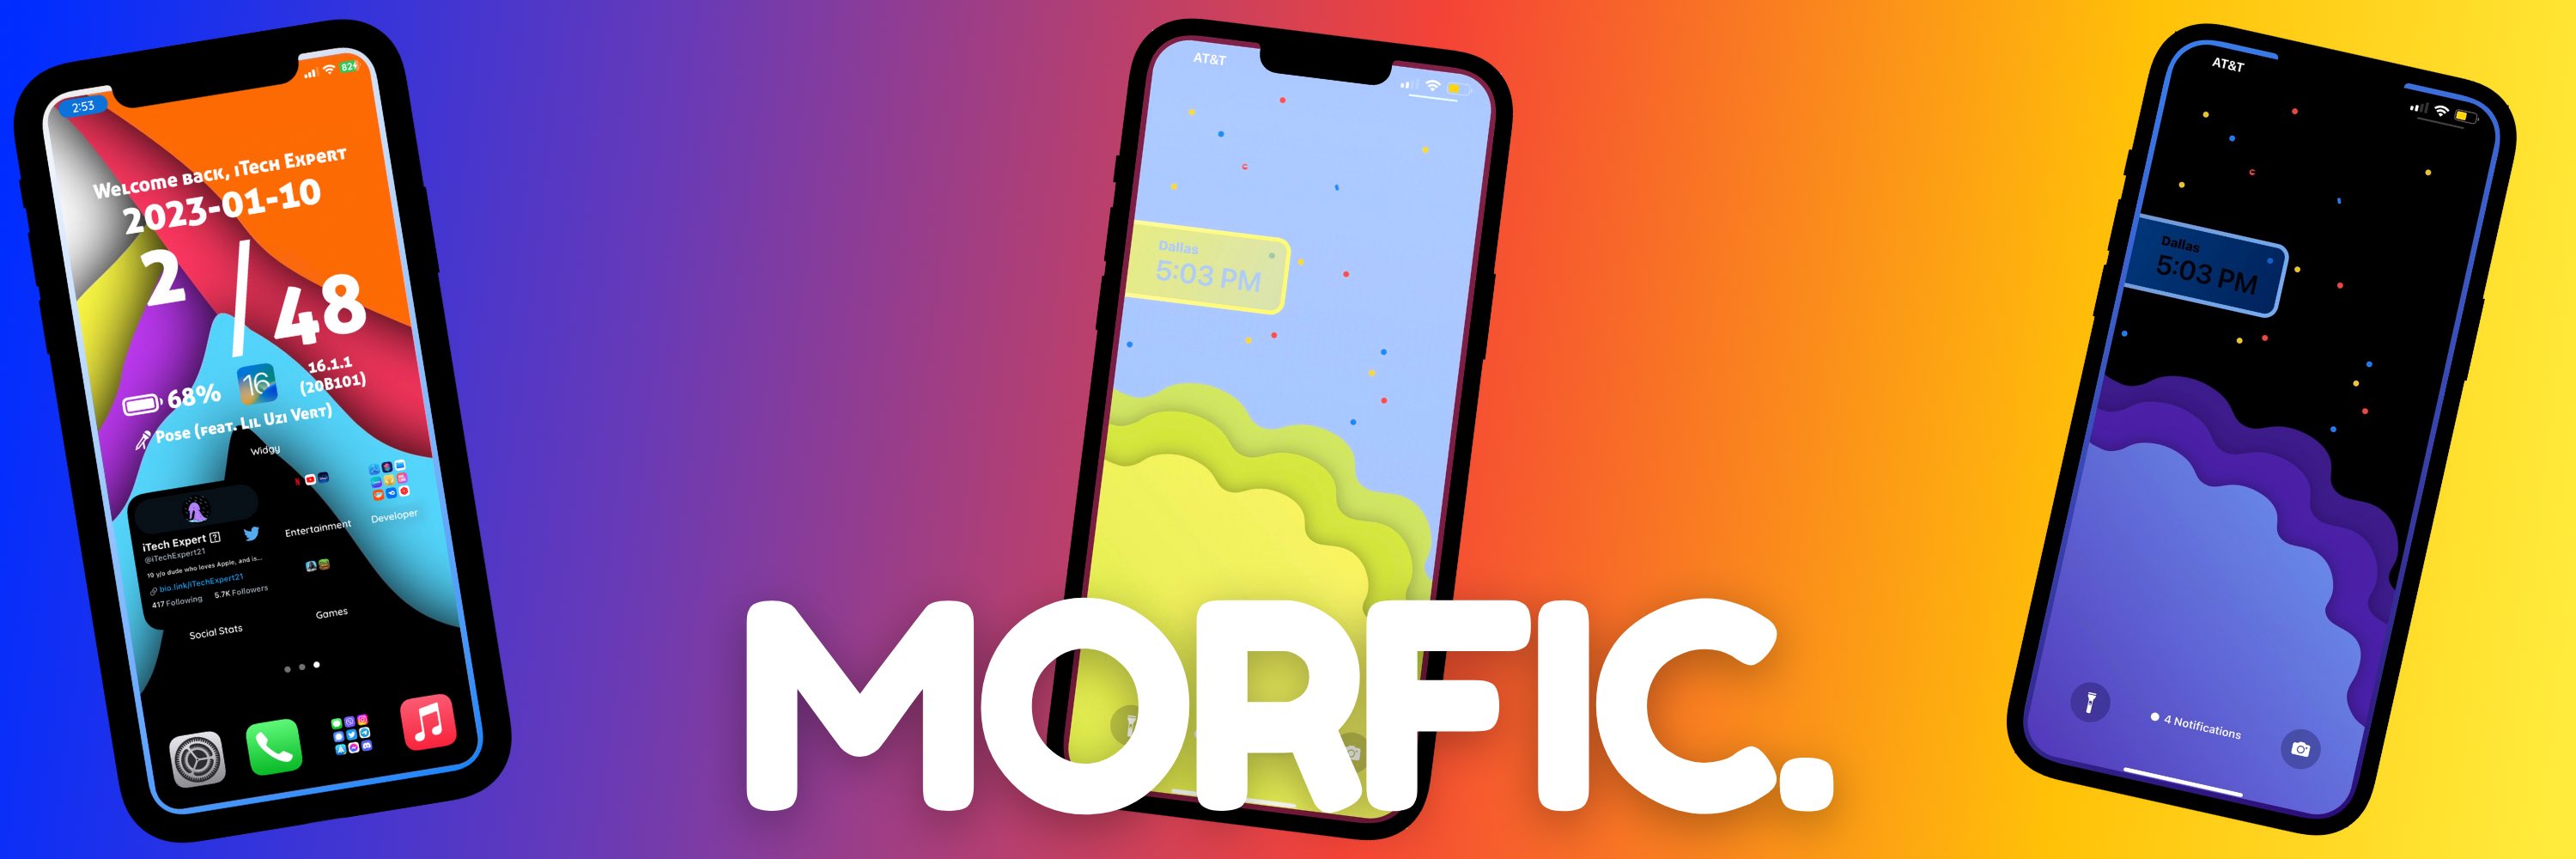 Popular Morfic wallpaper customization app goes free in the App Store  following successful launch